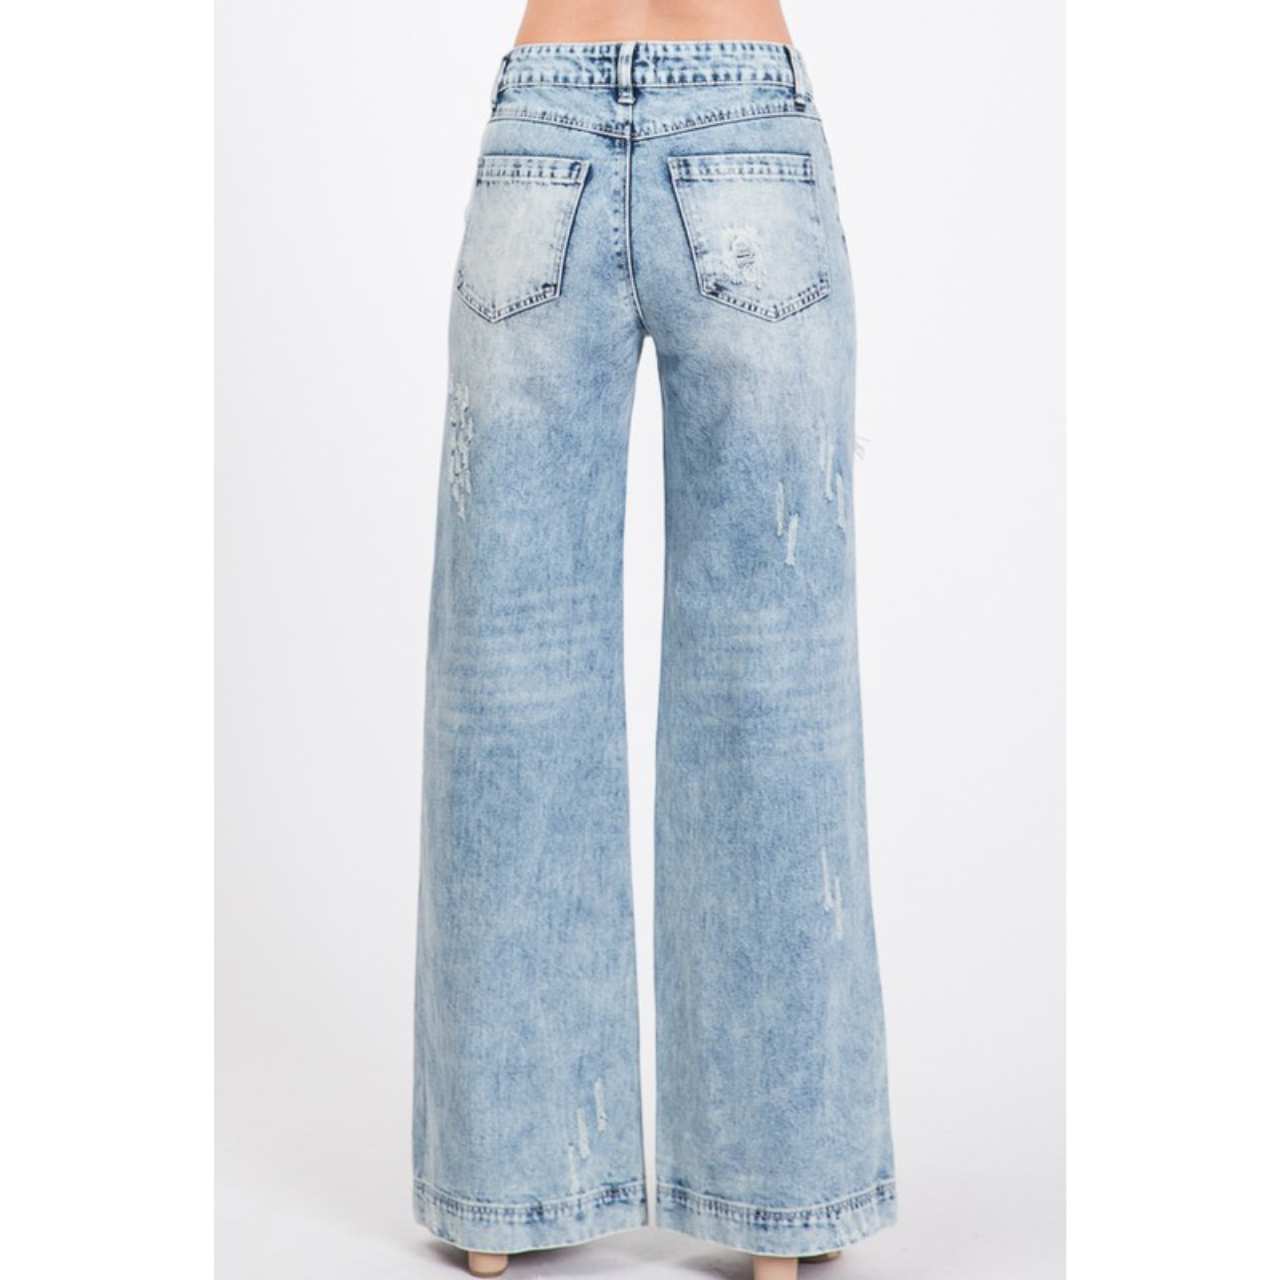 Ryleigh Distressed Wide Leg Jeans - The Graphic Tee